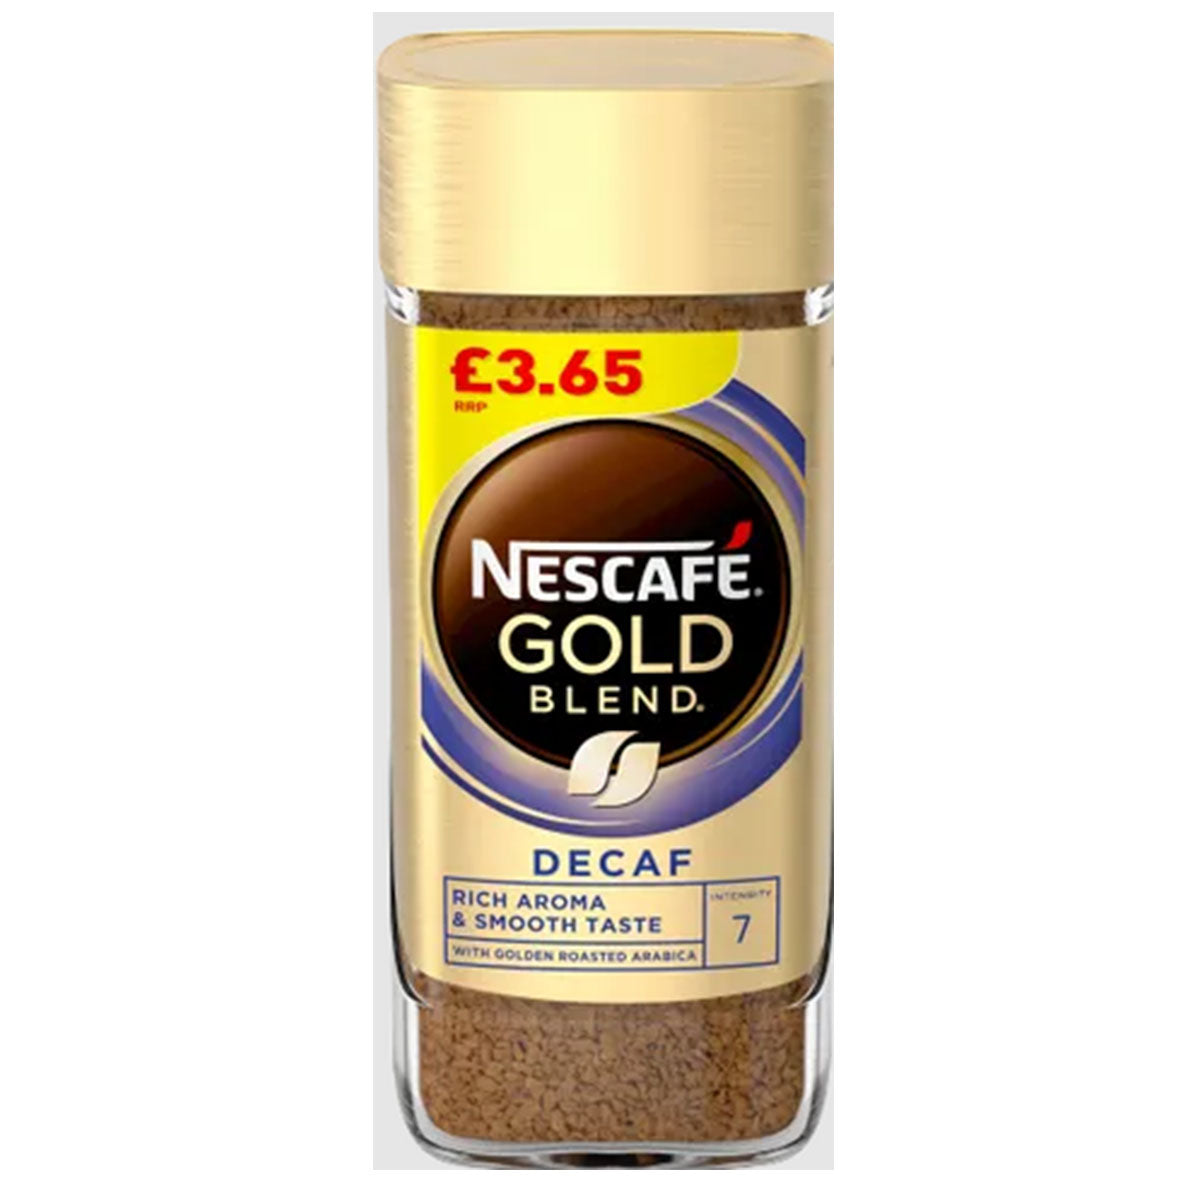 Nescafe - Gold Blend Decaf - 95g - Continental Food Store